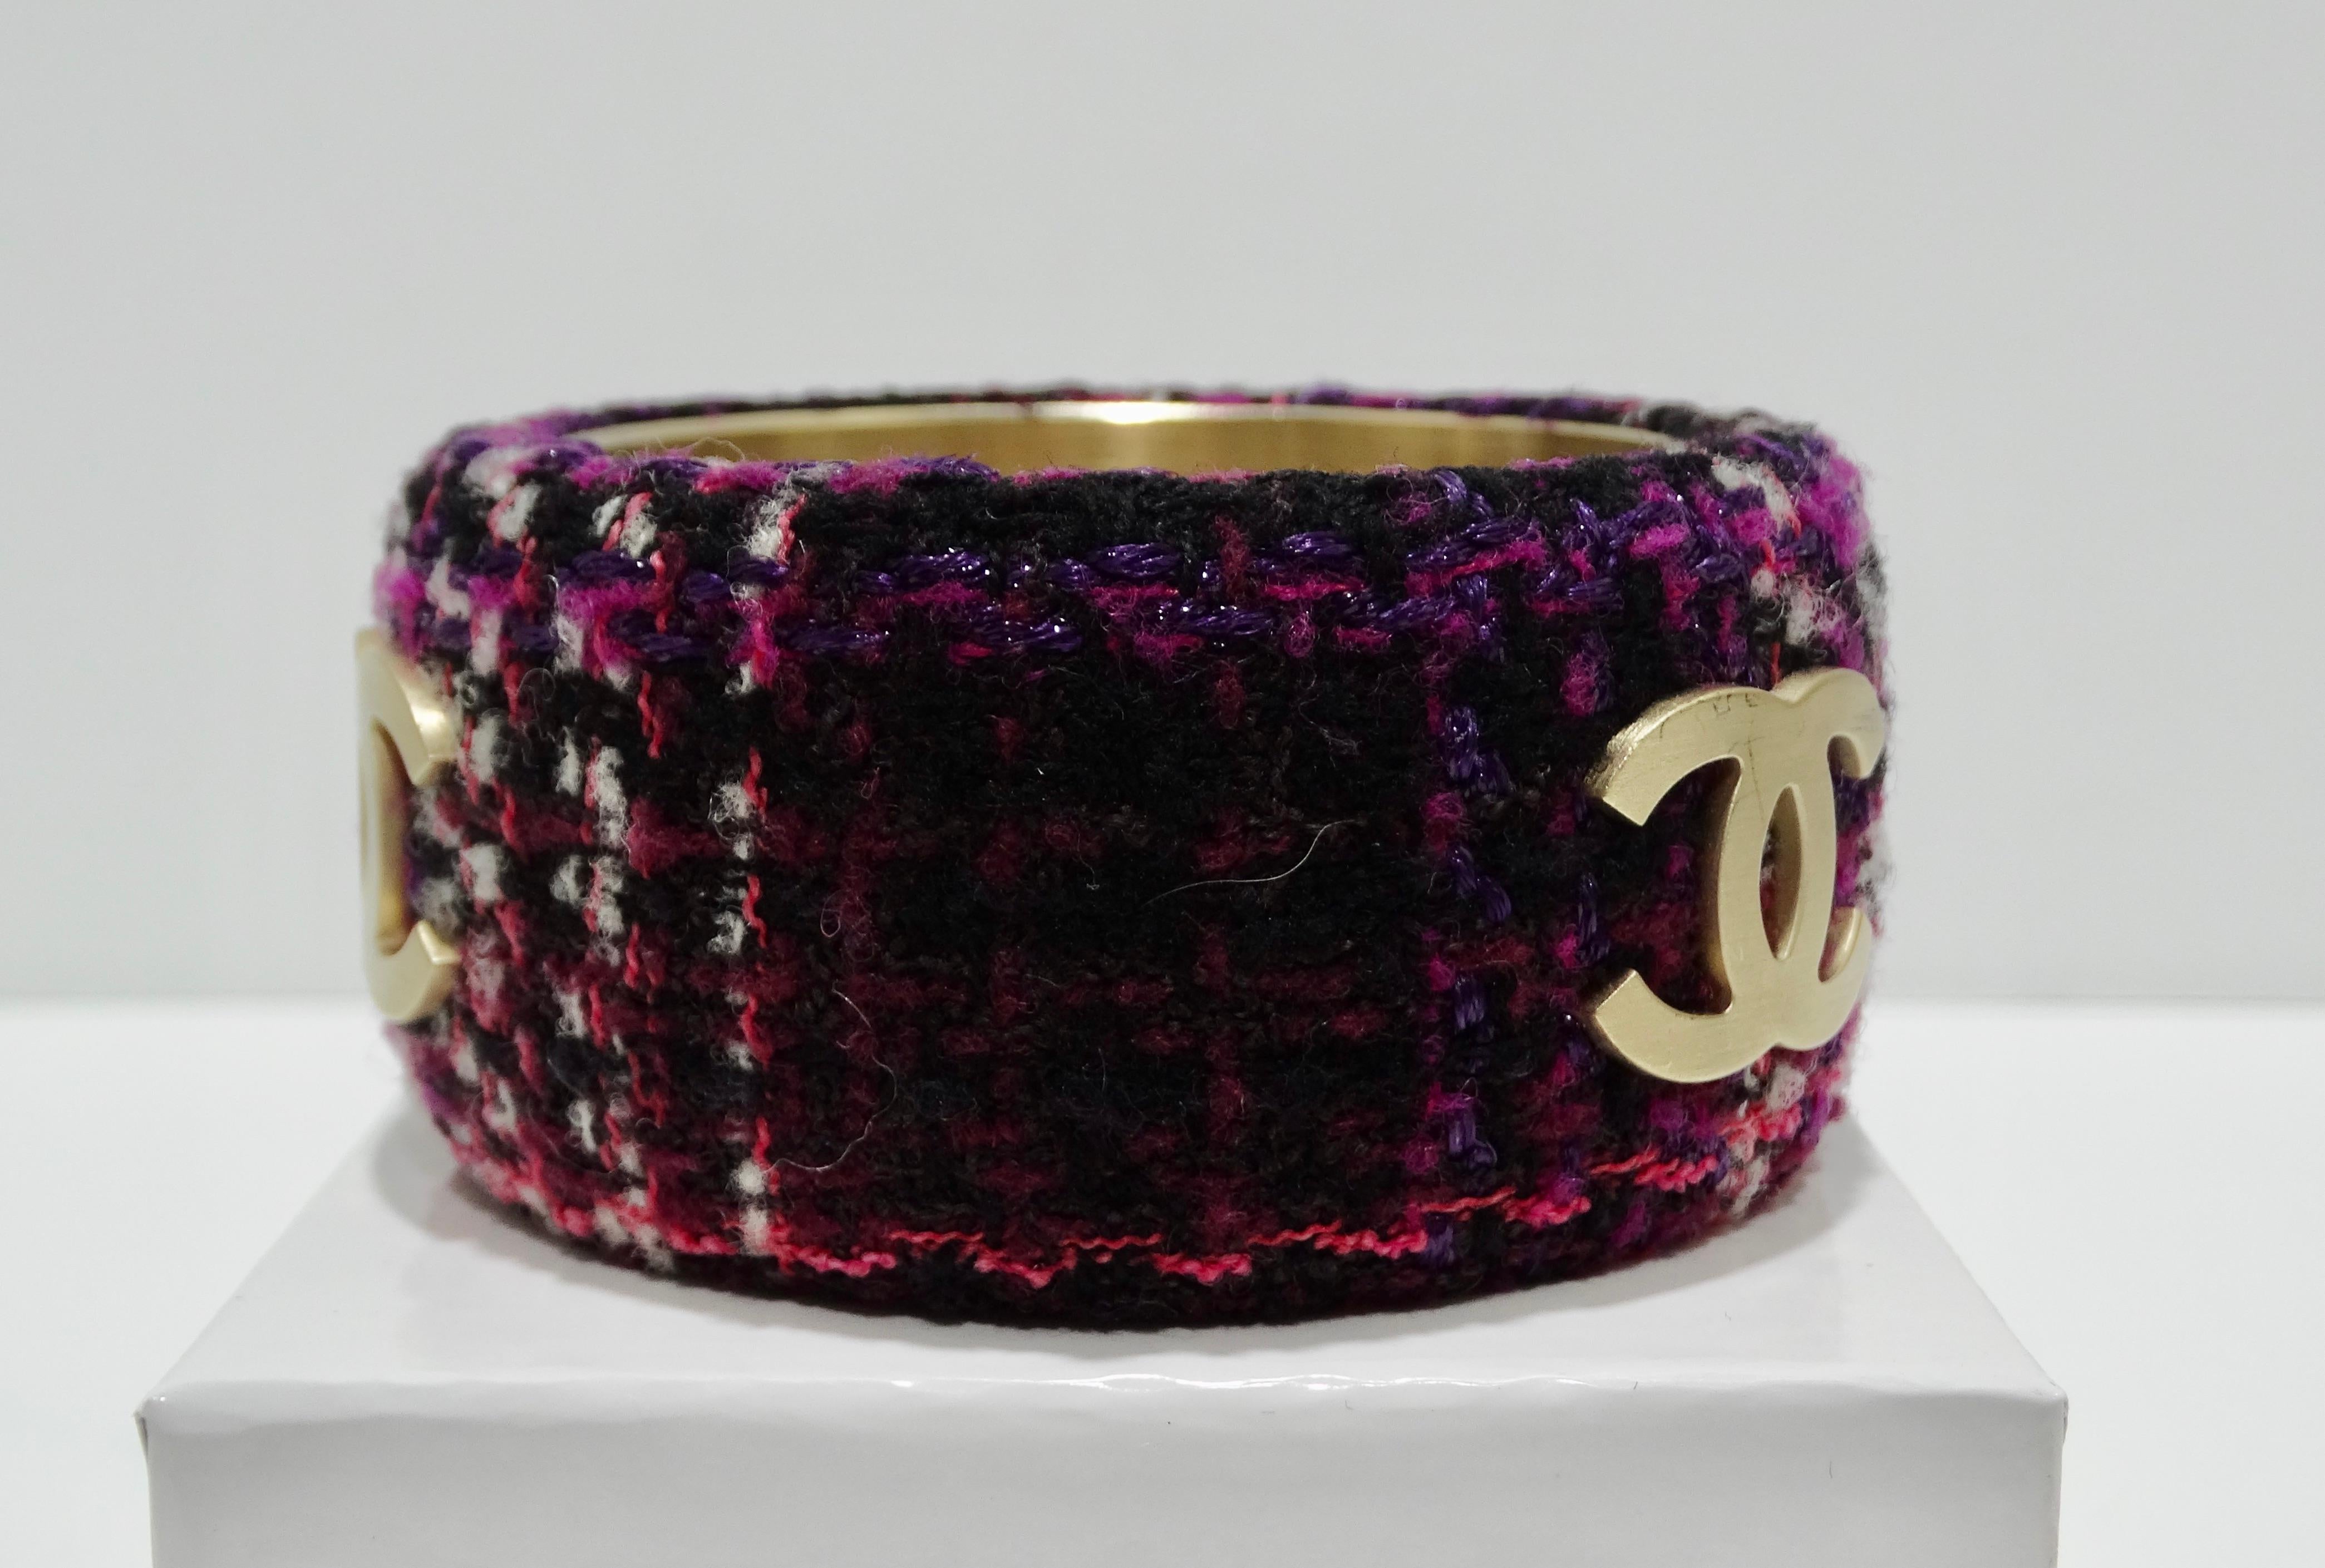 Calling all Chanel lovers! Circa 2009 from their fall/winter collection, this cuff features pink, purple, black and white tweed with brushed gold hardware. Spaced evenly throughout the cuff is the iconic CC logo. Interior stamp reads 09A made in